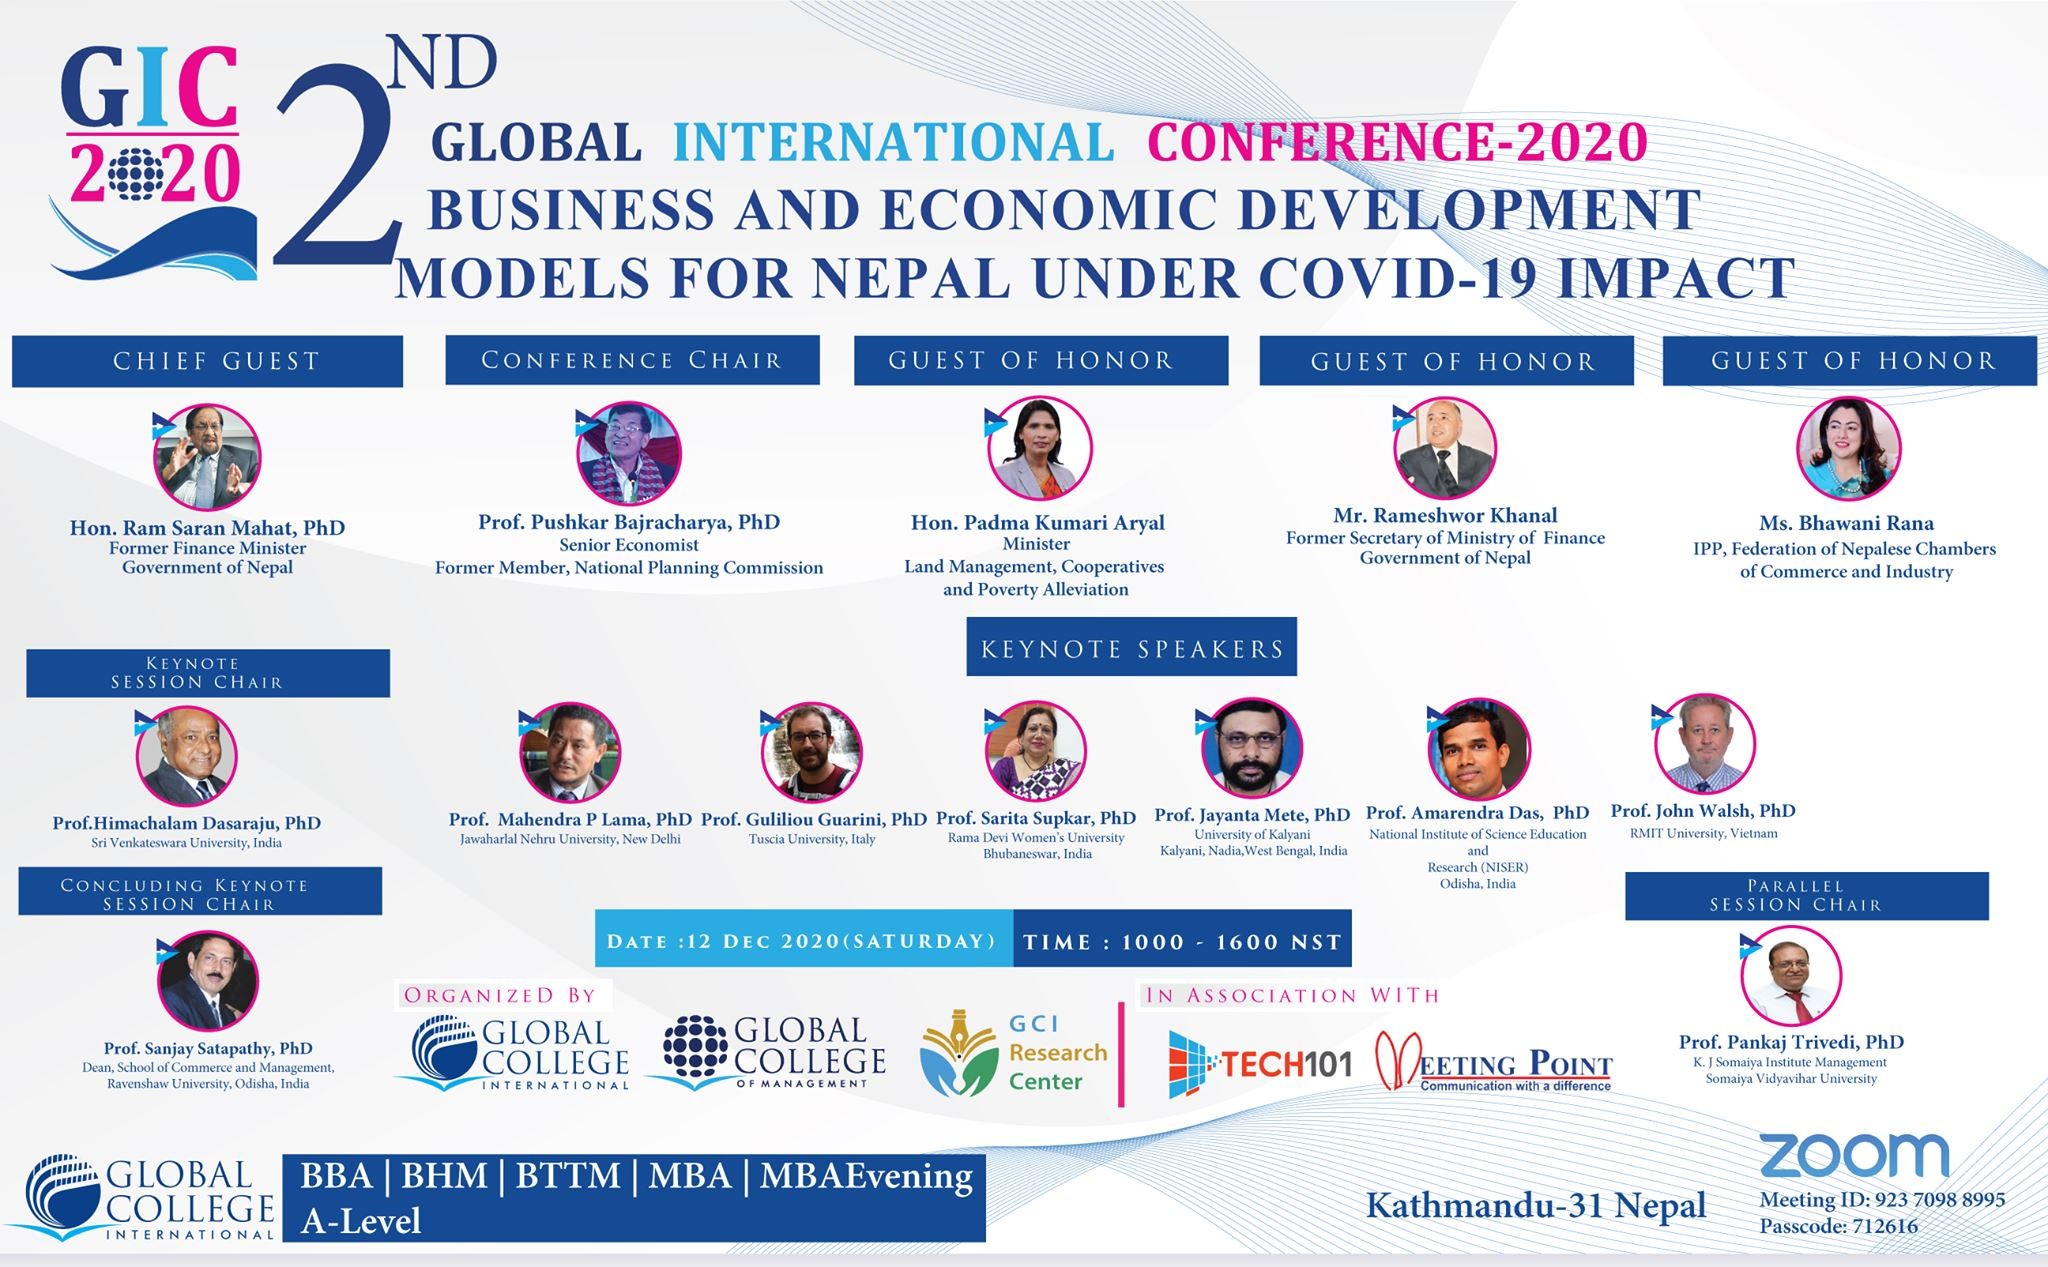 GCI All Set to organize 2nd Global International Conference - 2020